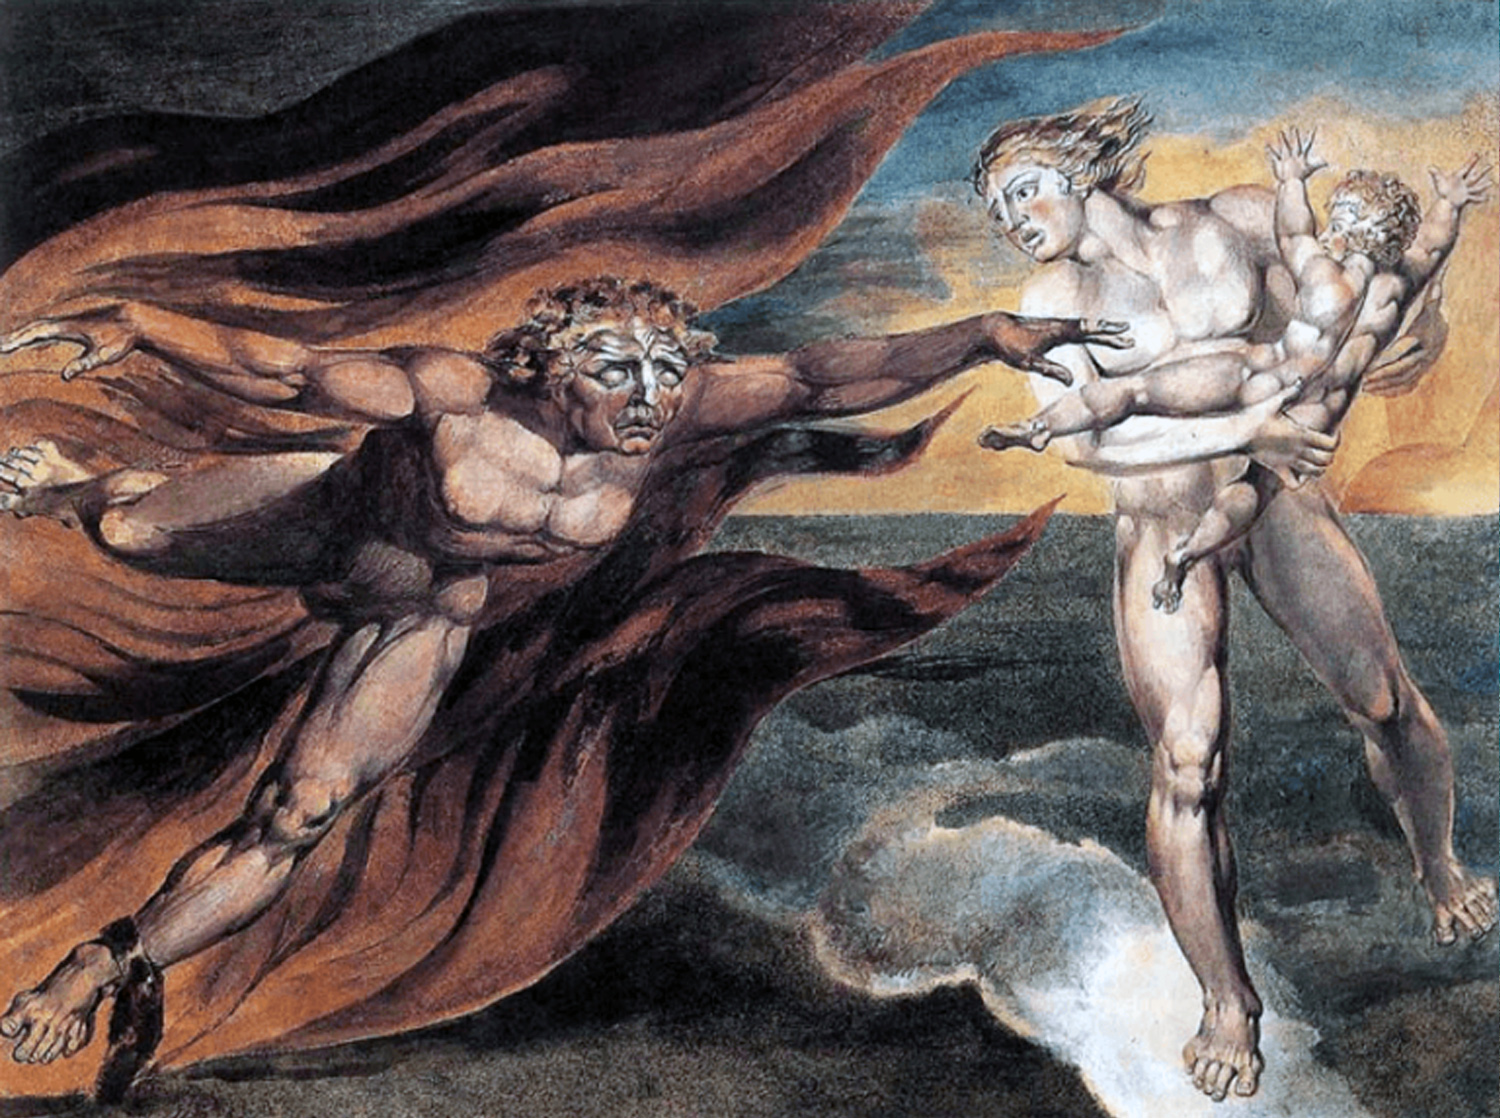 The Good and Evil Angels 1795-?c. 1805 William Blake 1757-1827 Presented by W. Graham Robertson 1939 http://www.tate.org.uk/art/work/N05057